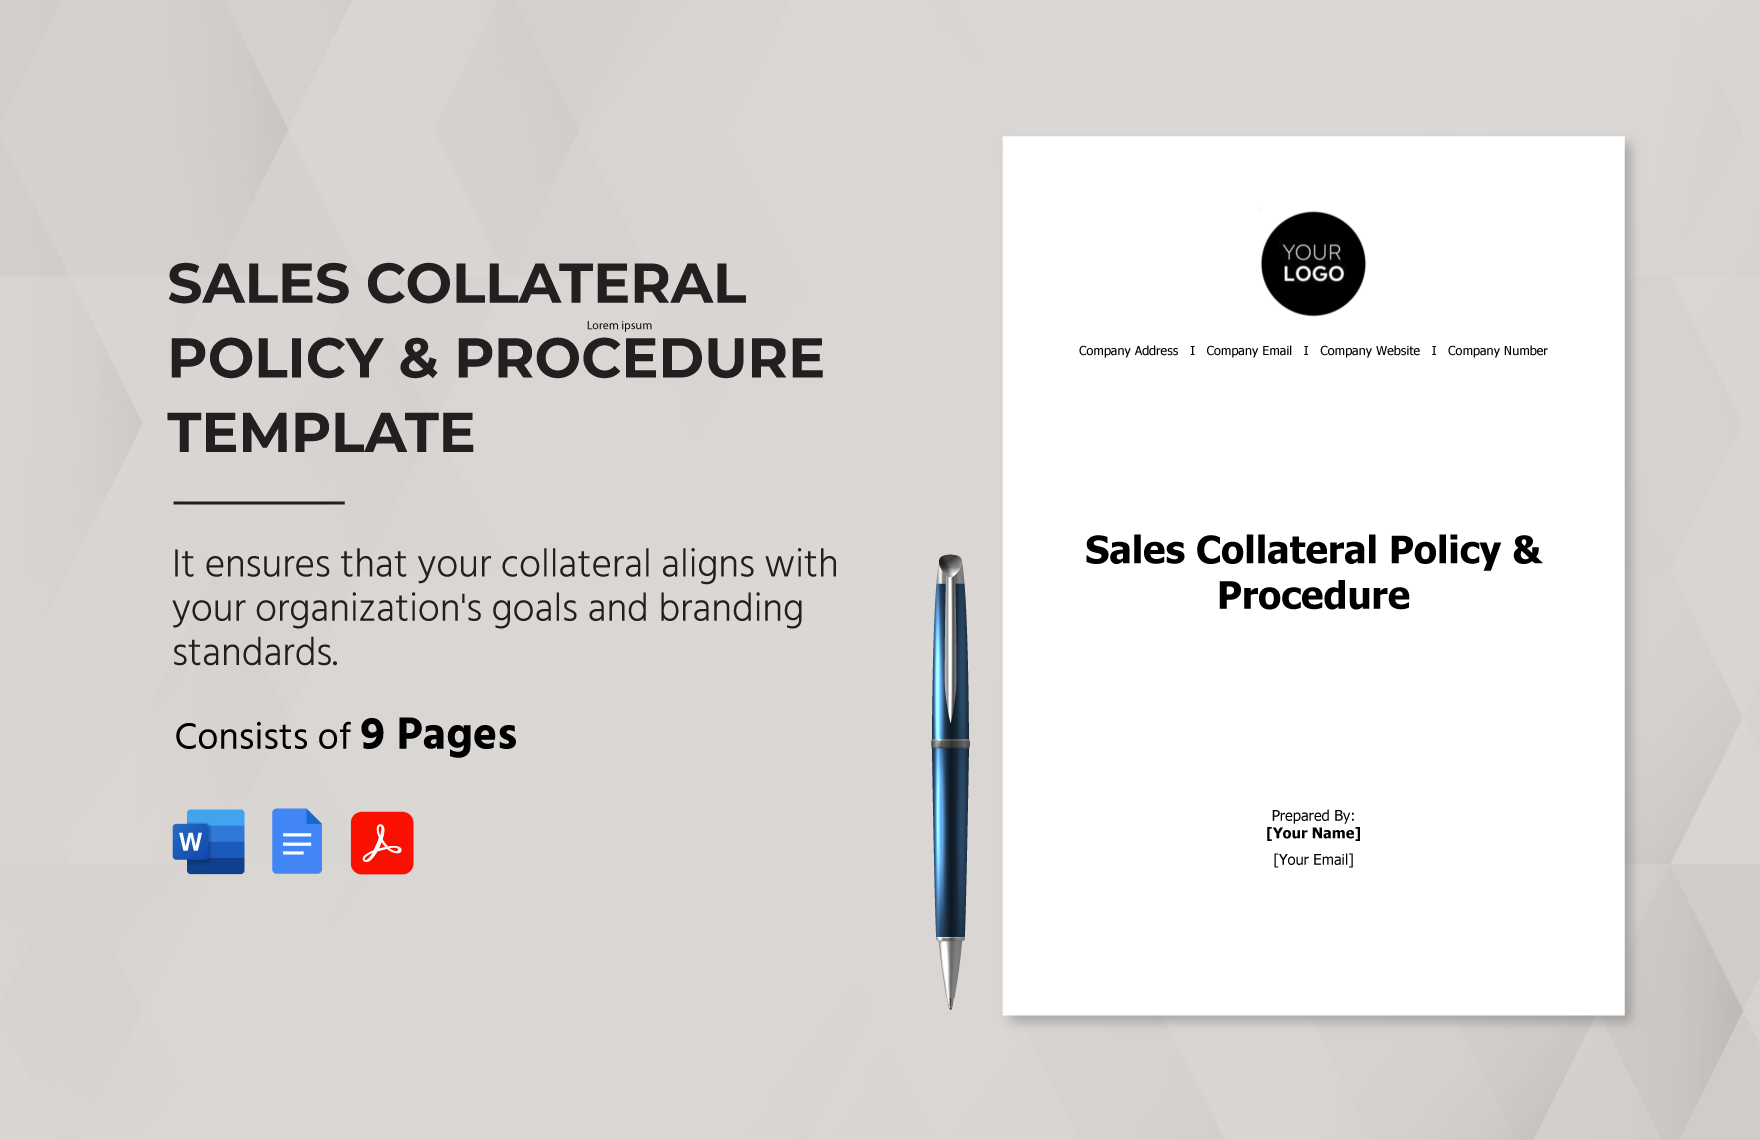 Sales Collateral Policy & Procedure Template